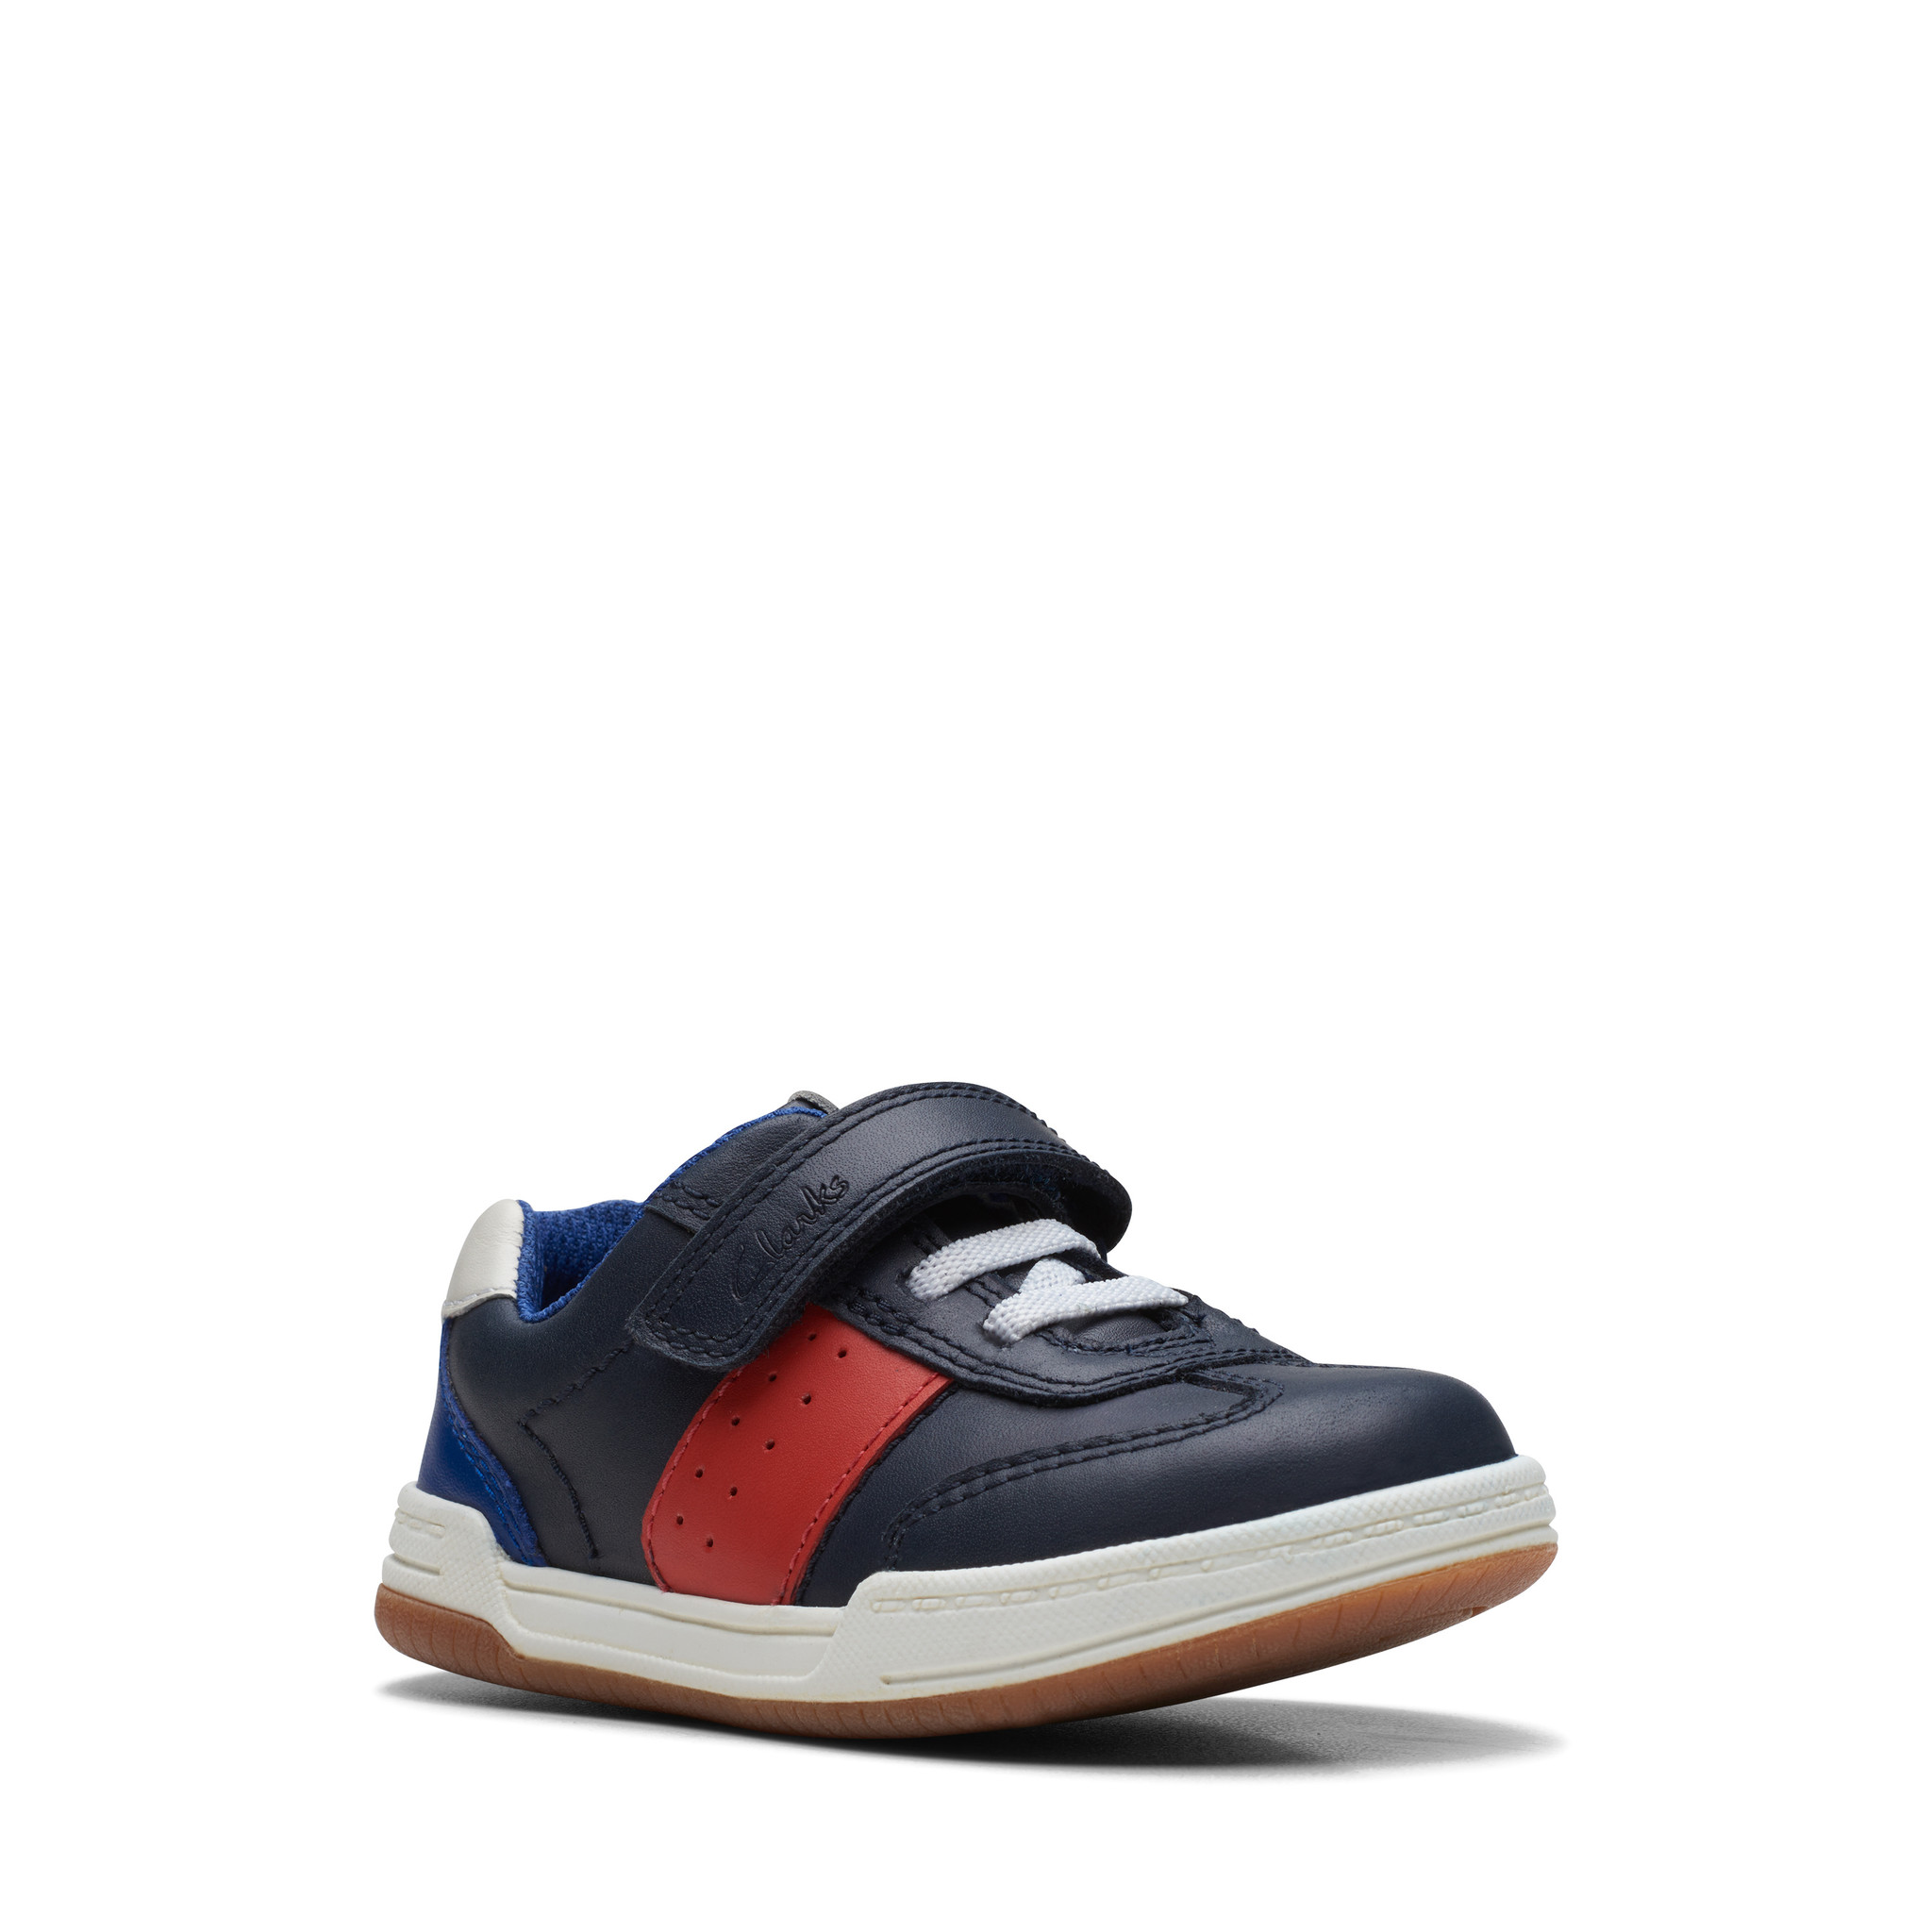 Clarks Fawn Family Navy Combi Infant